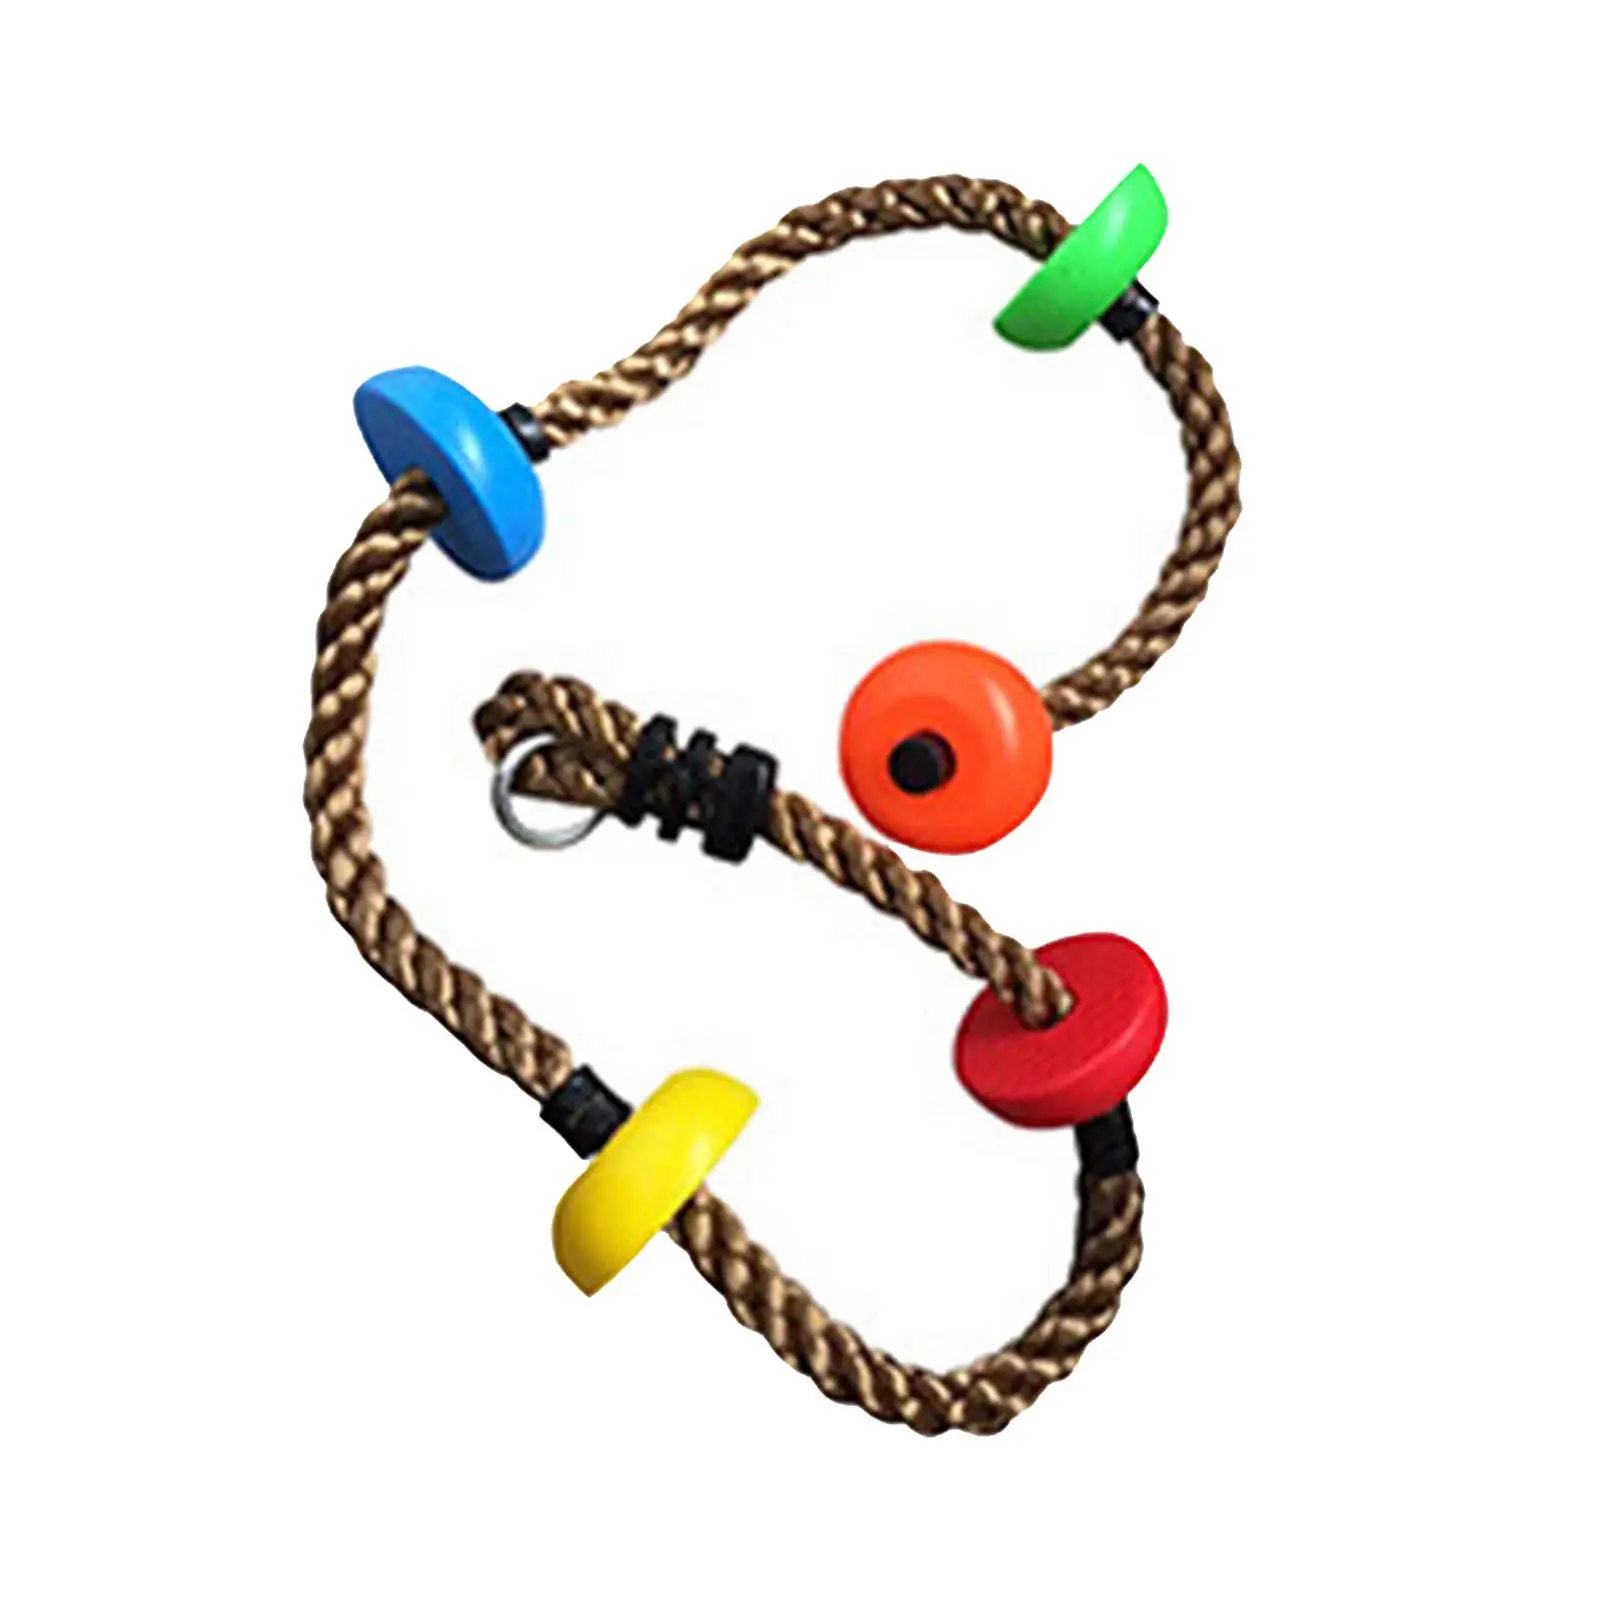 Climbing Rope Disc Accessory Equipment Set Props Games Sports Swing Ladder Swing for Playground Garden Exercise Boys Girls Kids